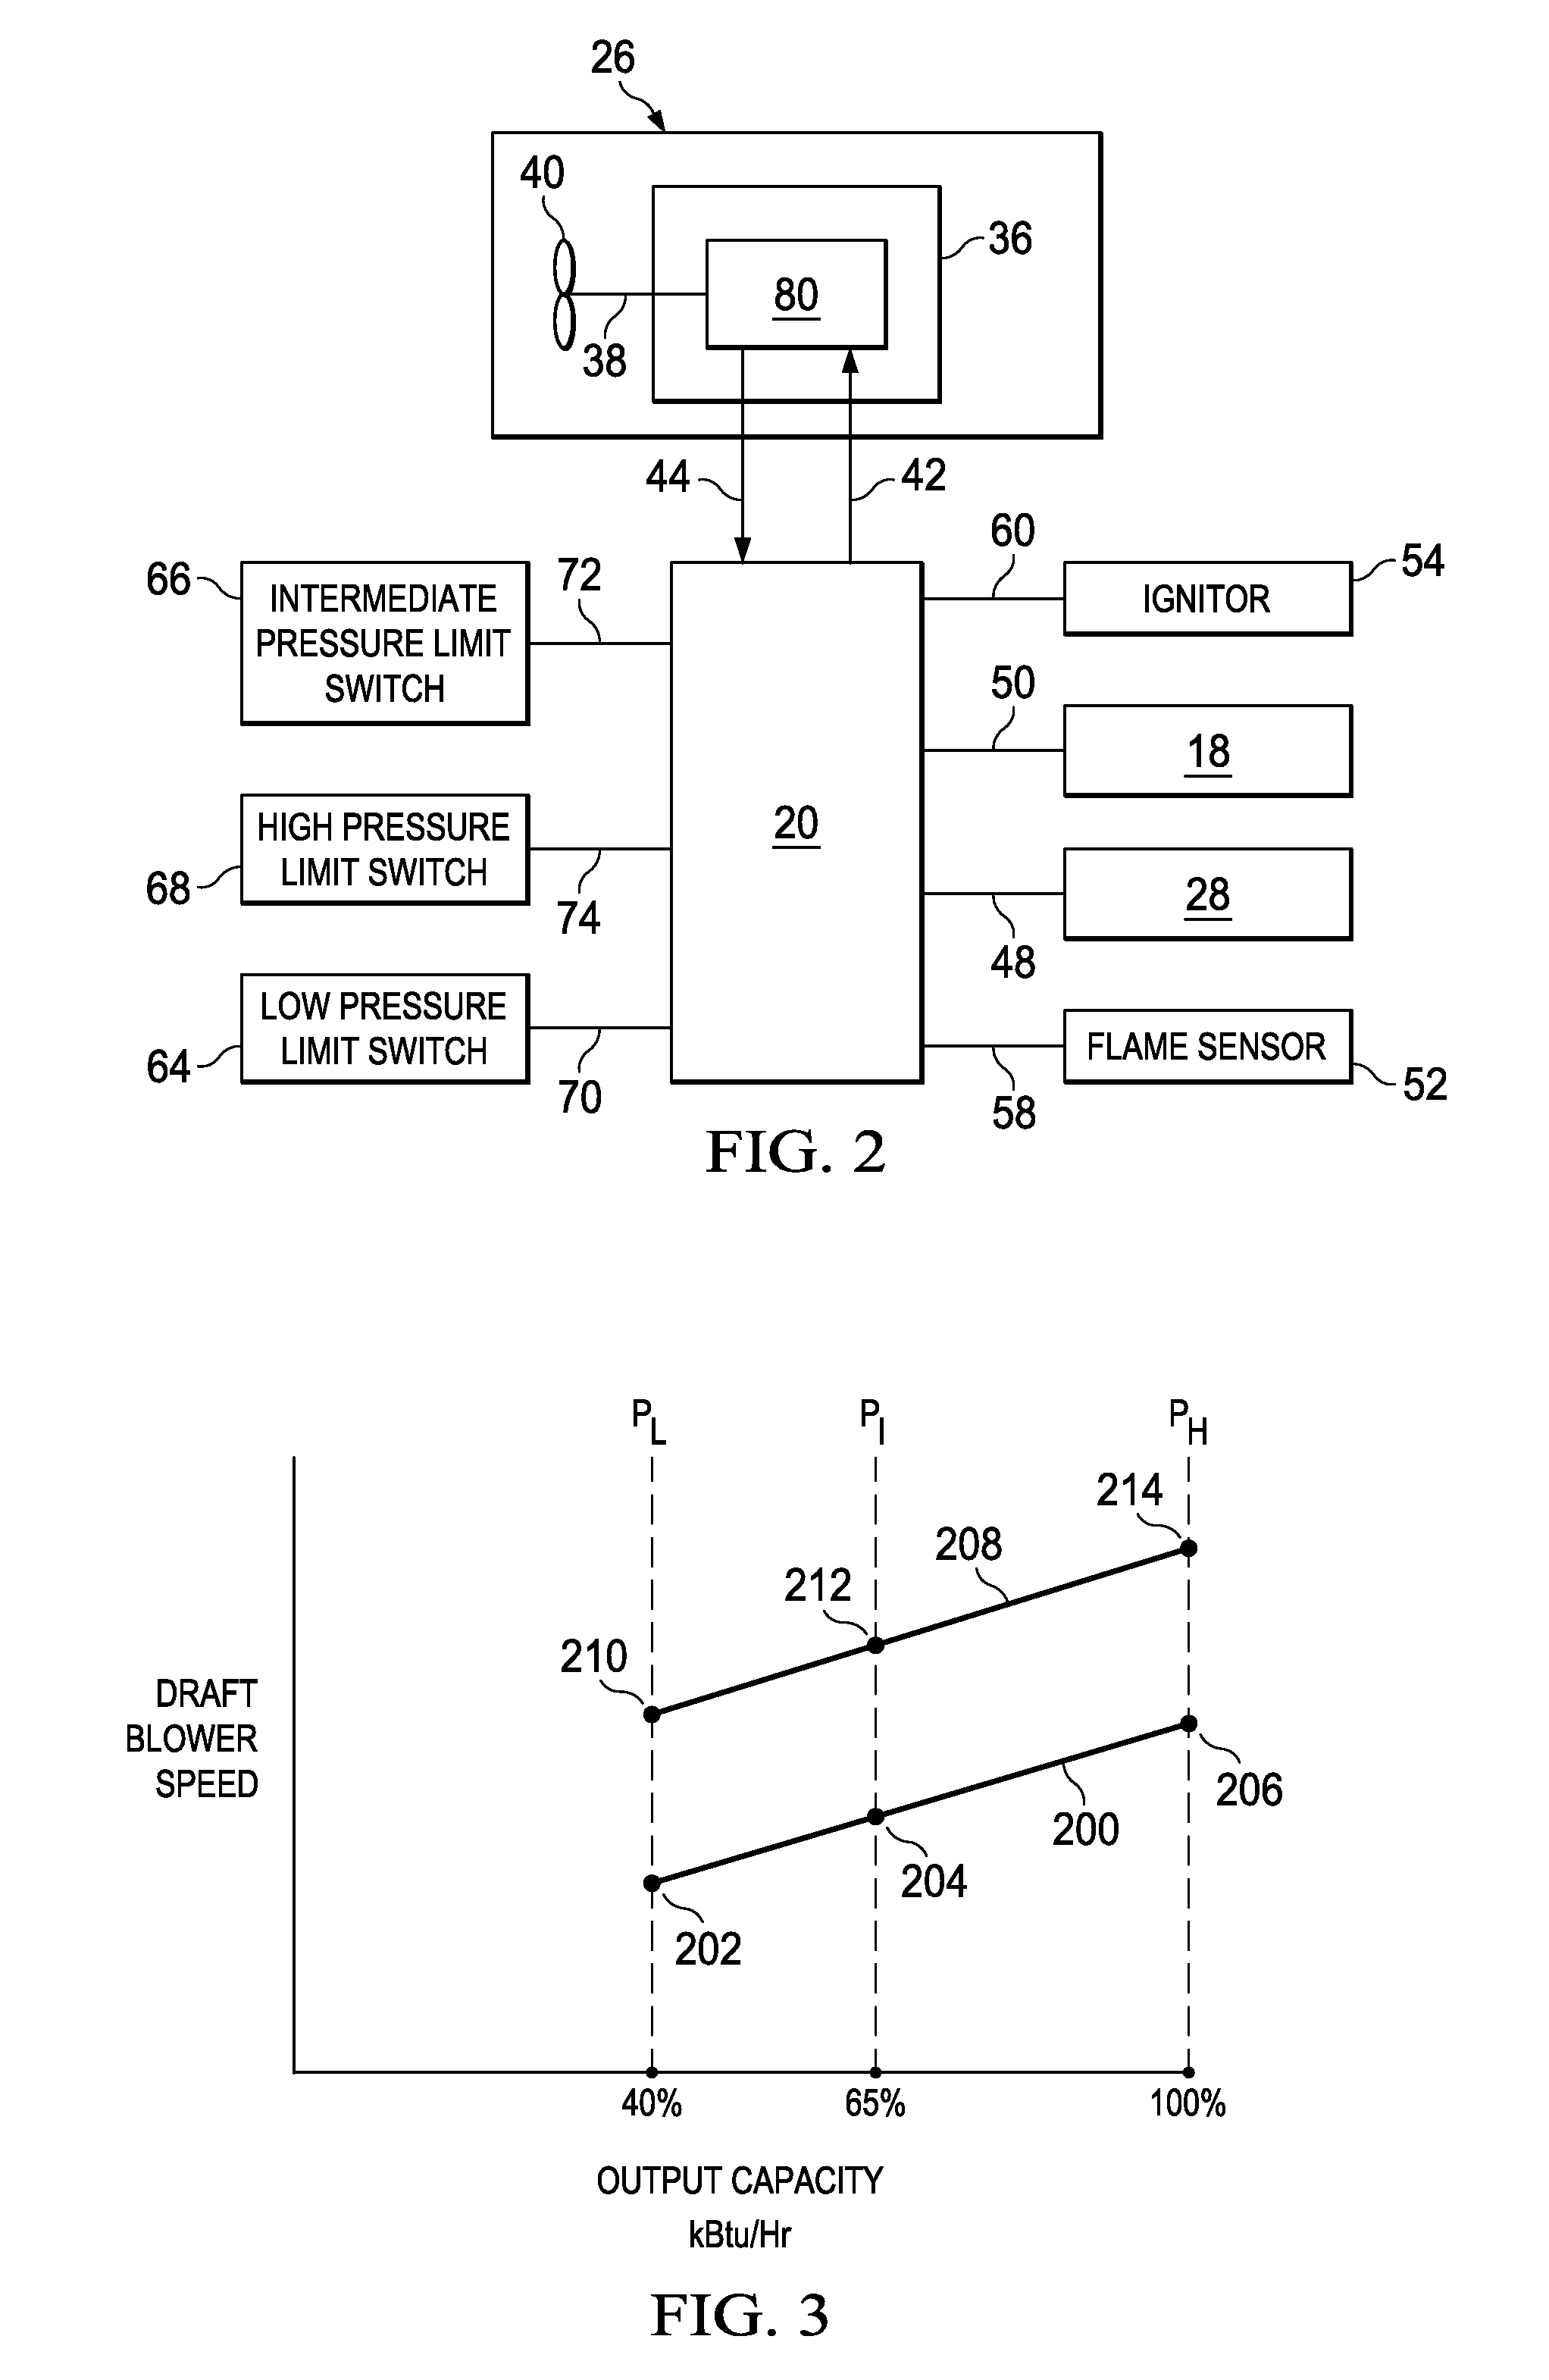 System and Method for Controlling A Furnace